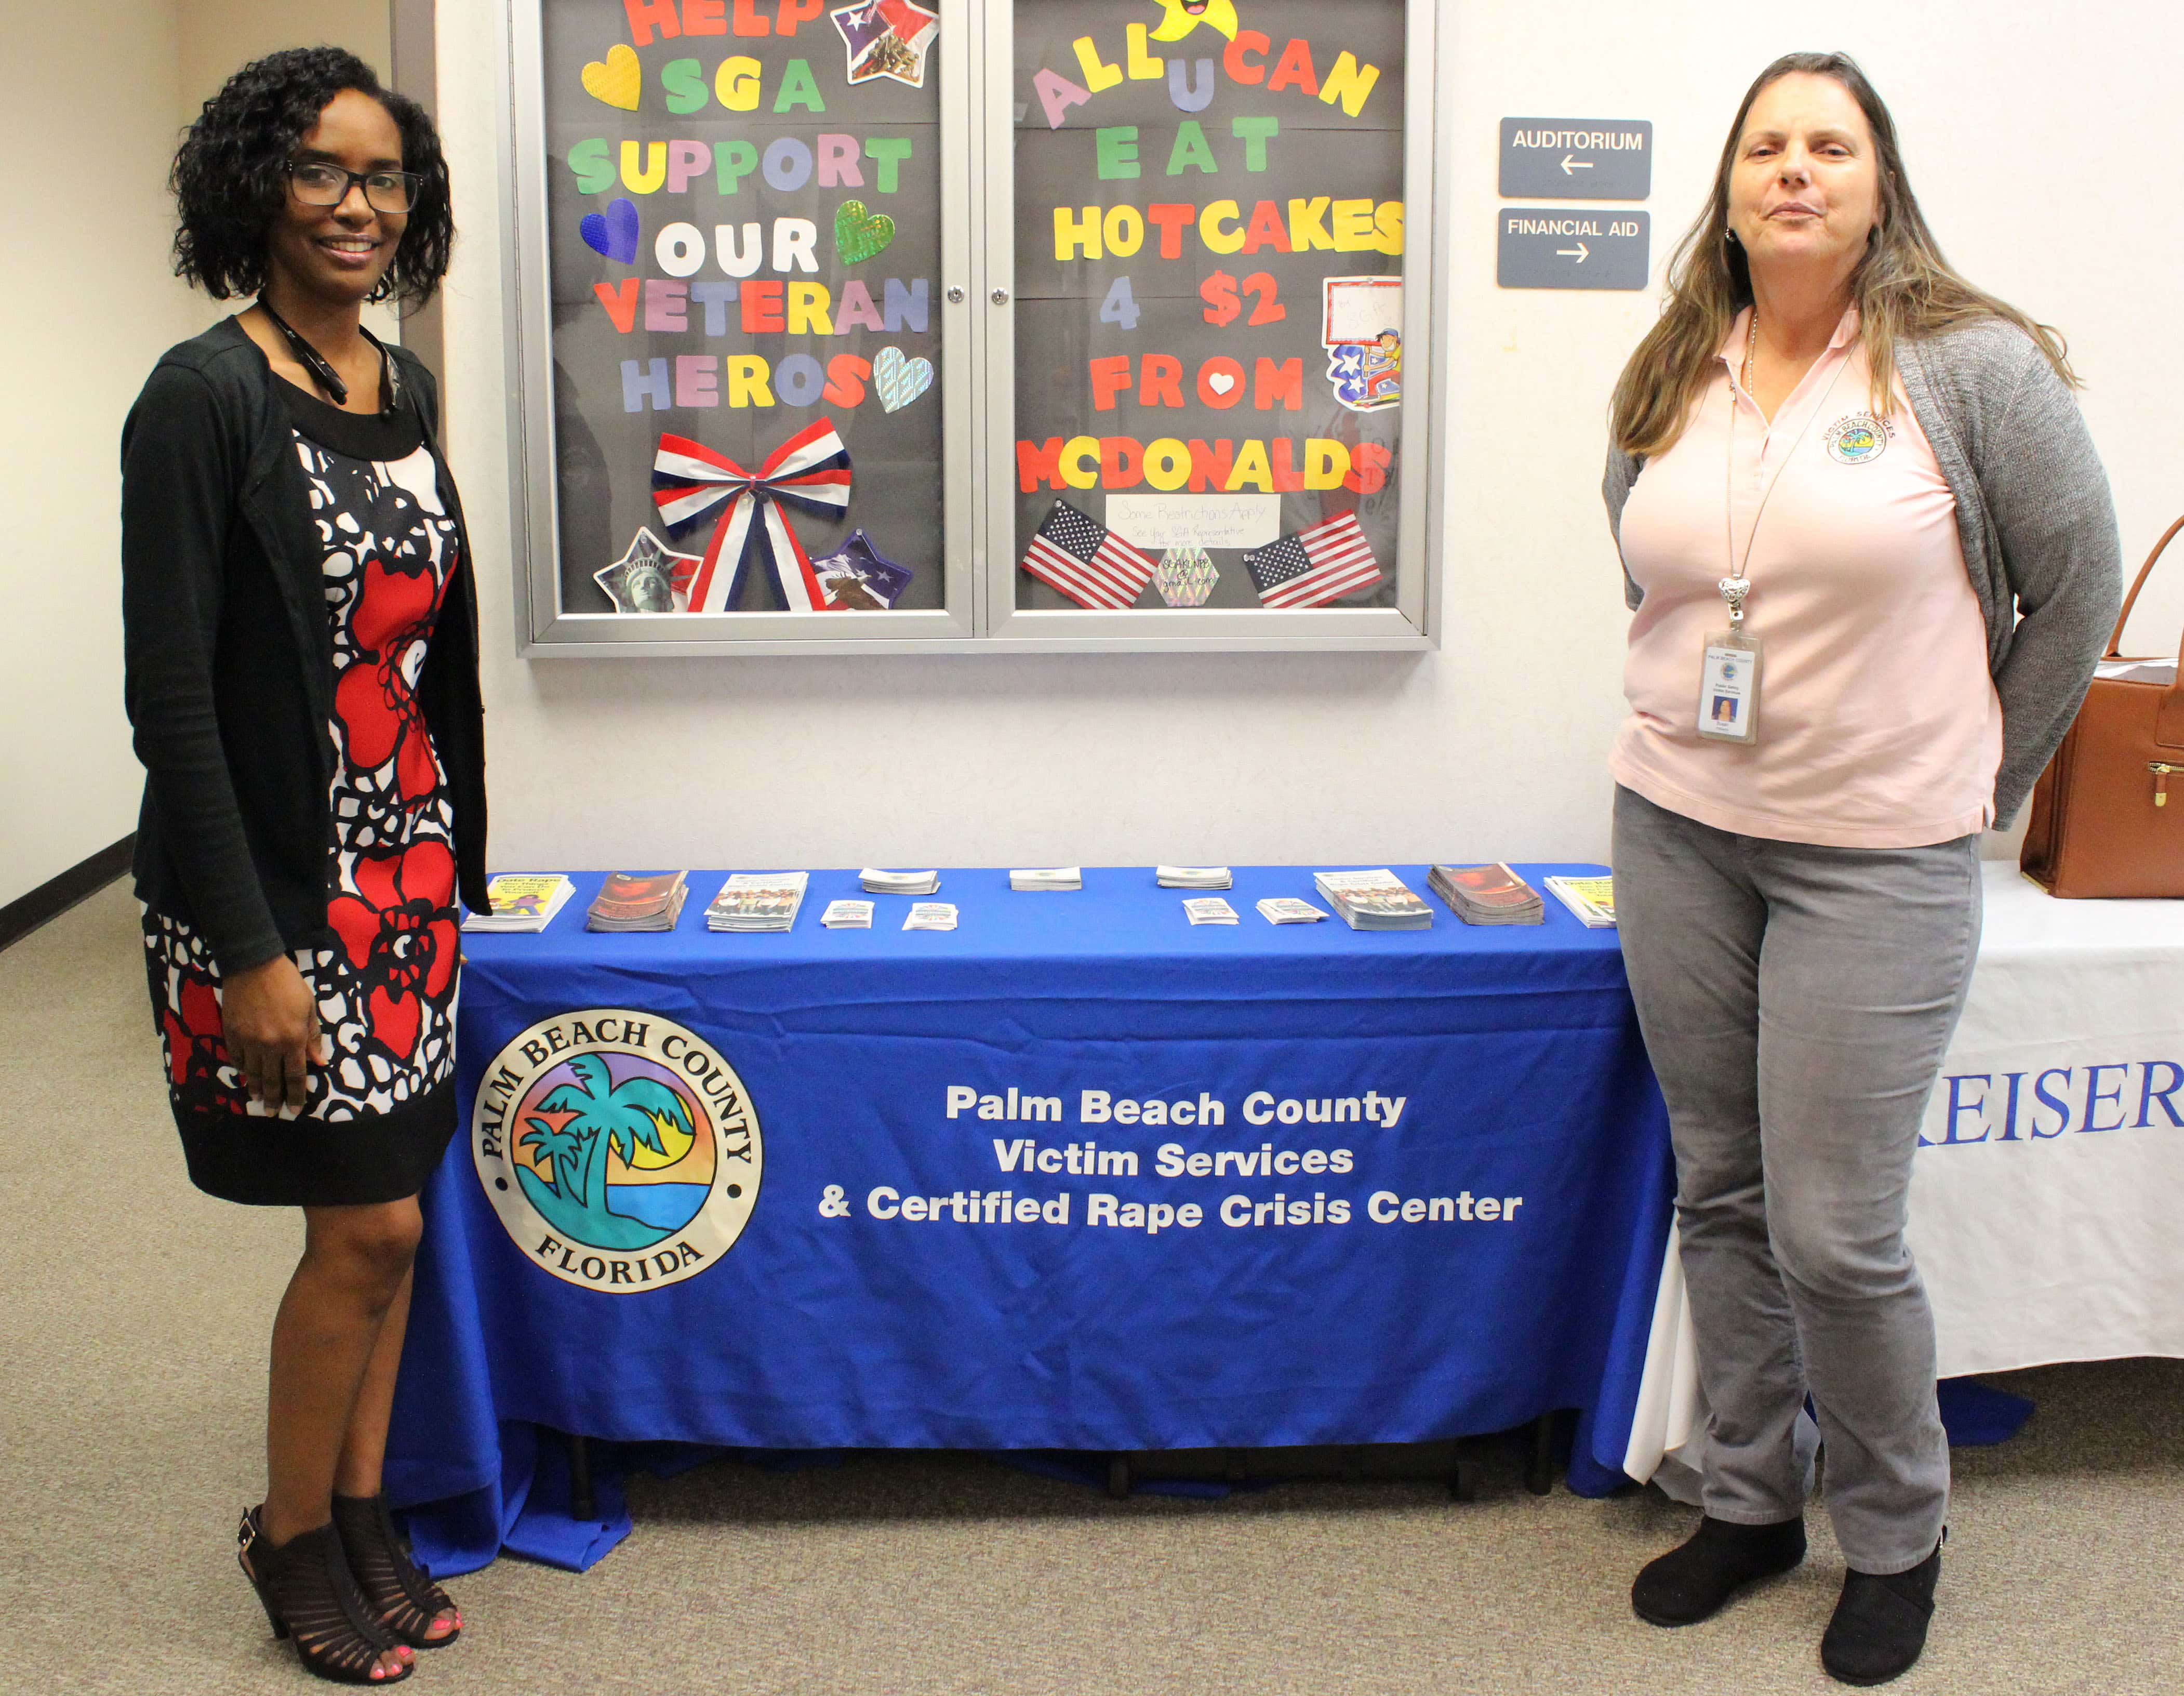 West Palm Beach Welcomes Representatives from the Palm Beach Co. Victim Services & Certified Rape Crisis Center